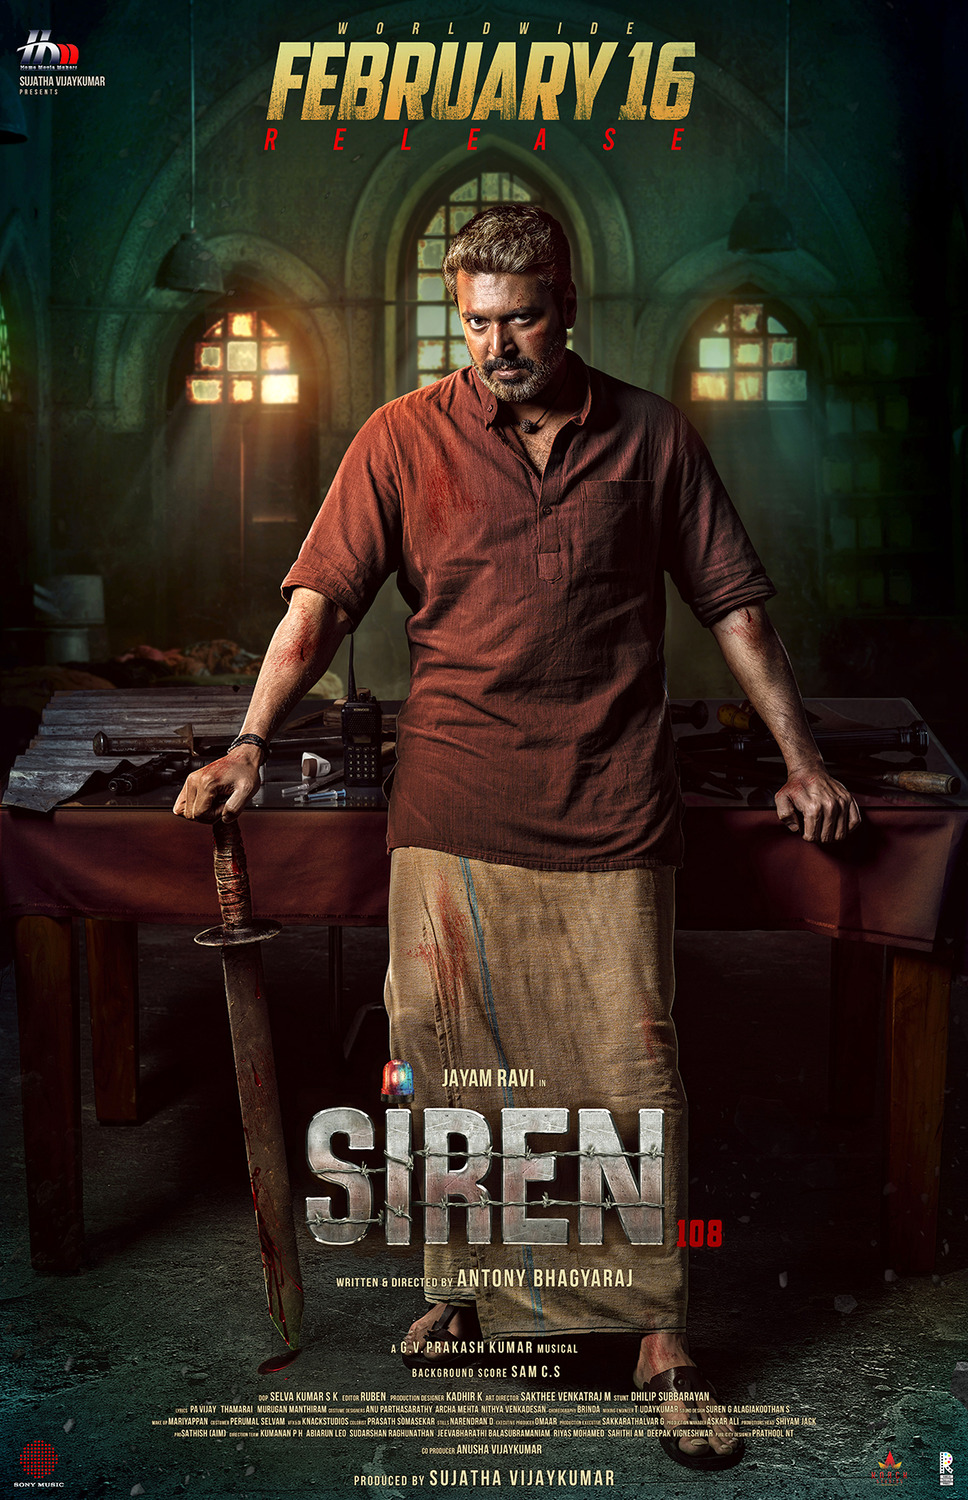 Extra Large Movie Poster Image for Siren 